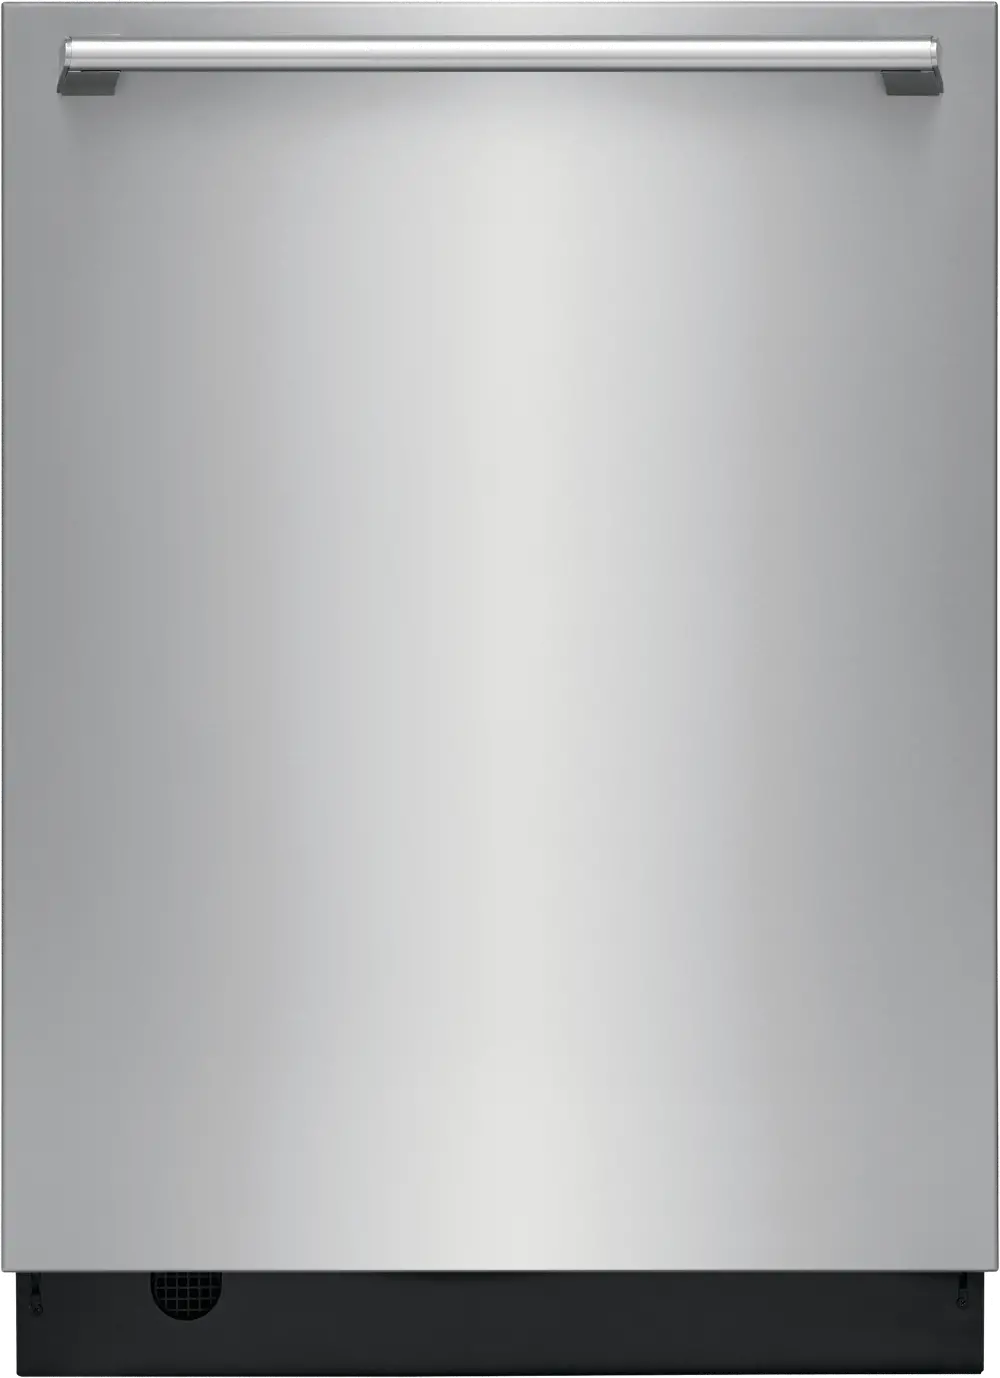 EDSH4944AS Electrolux Top Control Dishwasher - Stainless Steel-1